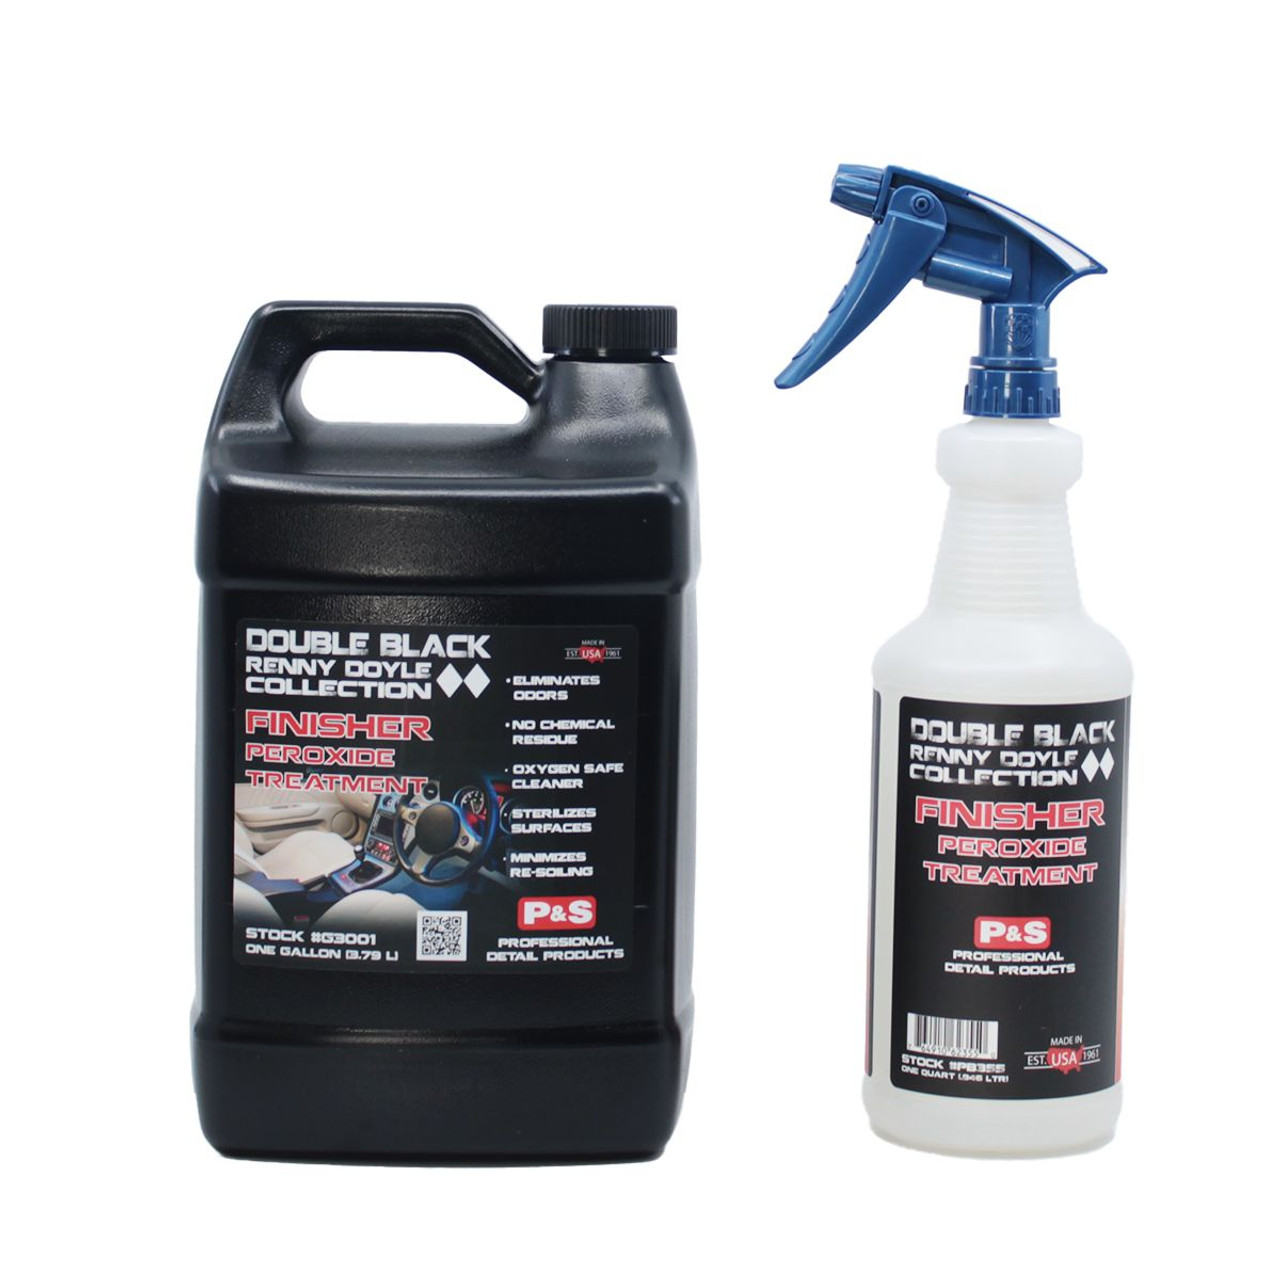 P&S Interior Cleaning 3 Step Gallon Kit